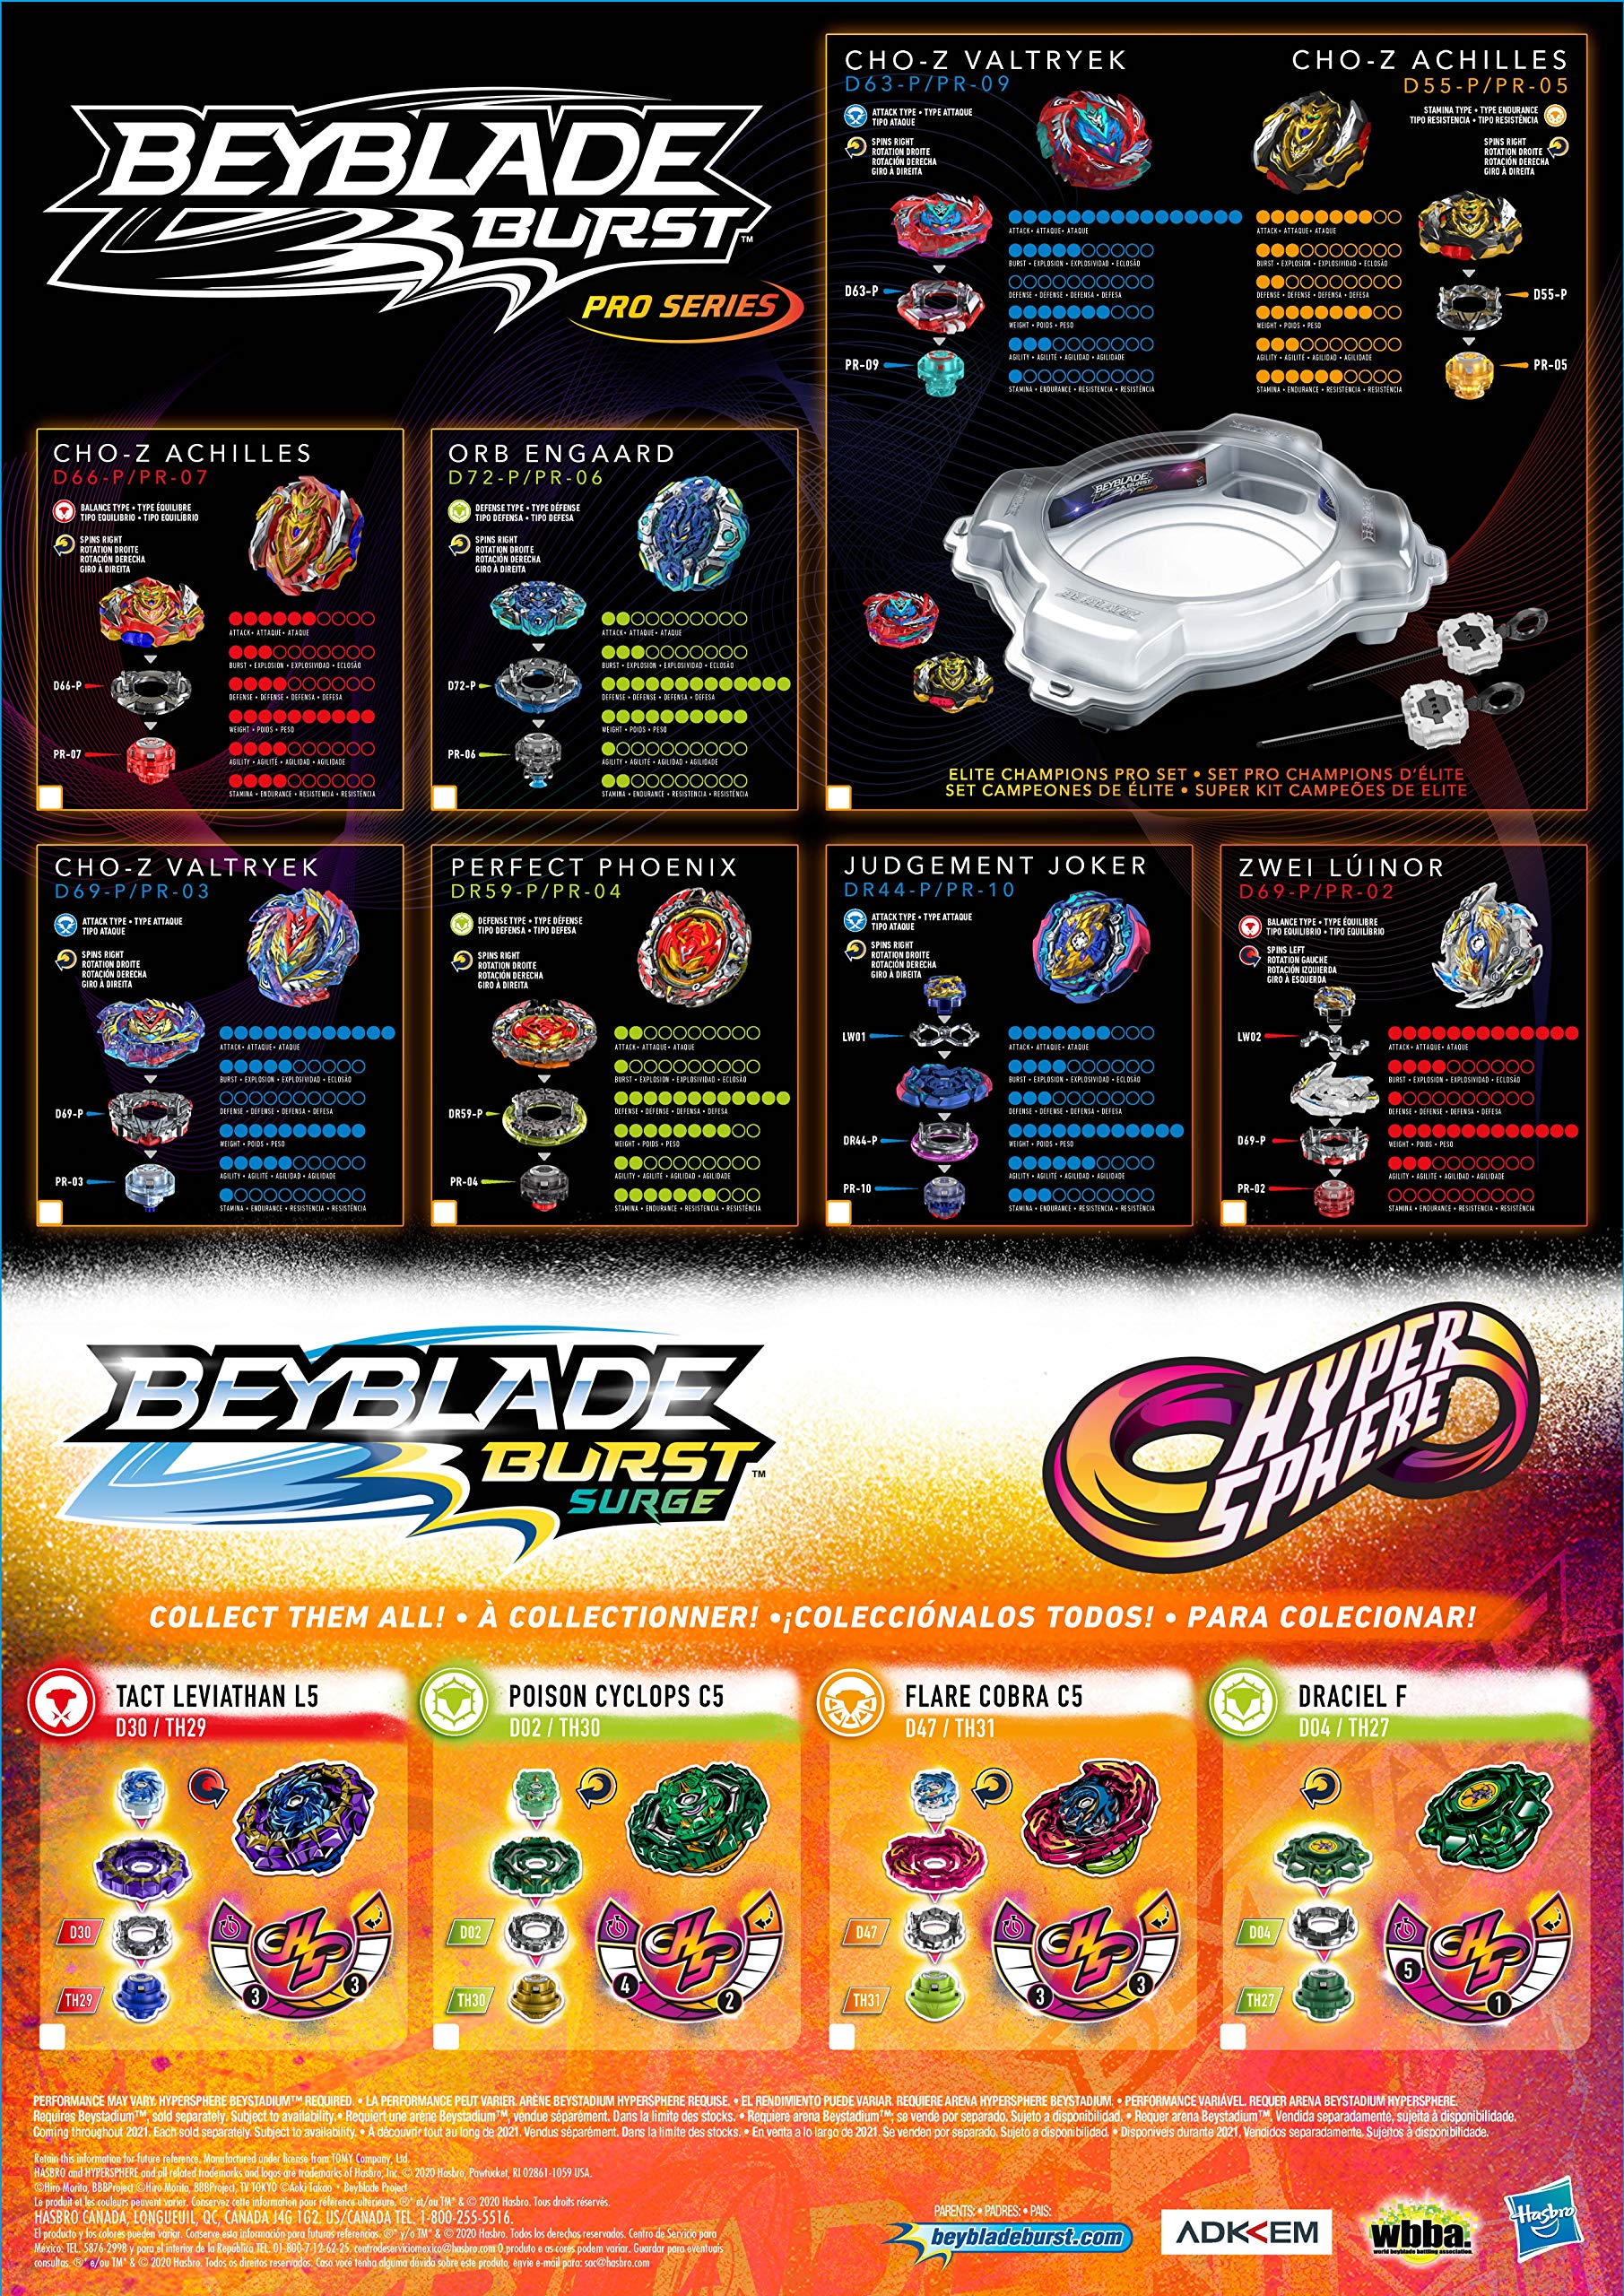 BEYBLADE Burst Pro Series Cho-Z Achilles Spinning Top Starter Pack -- Balance Type Battling Game Top with Launcher Toy